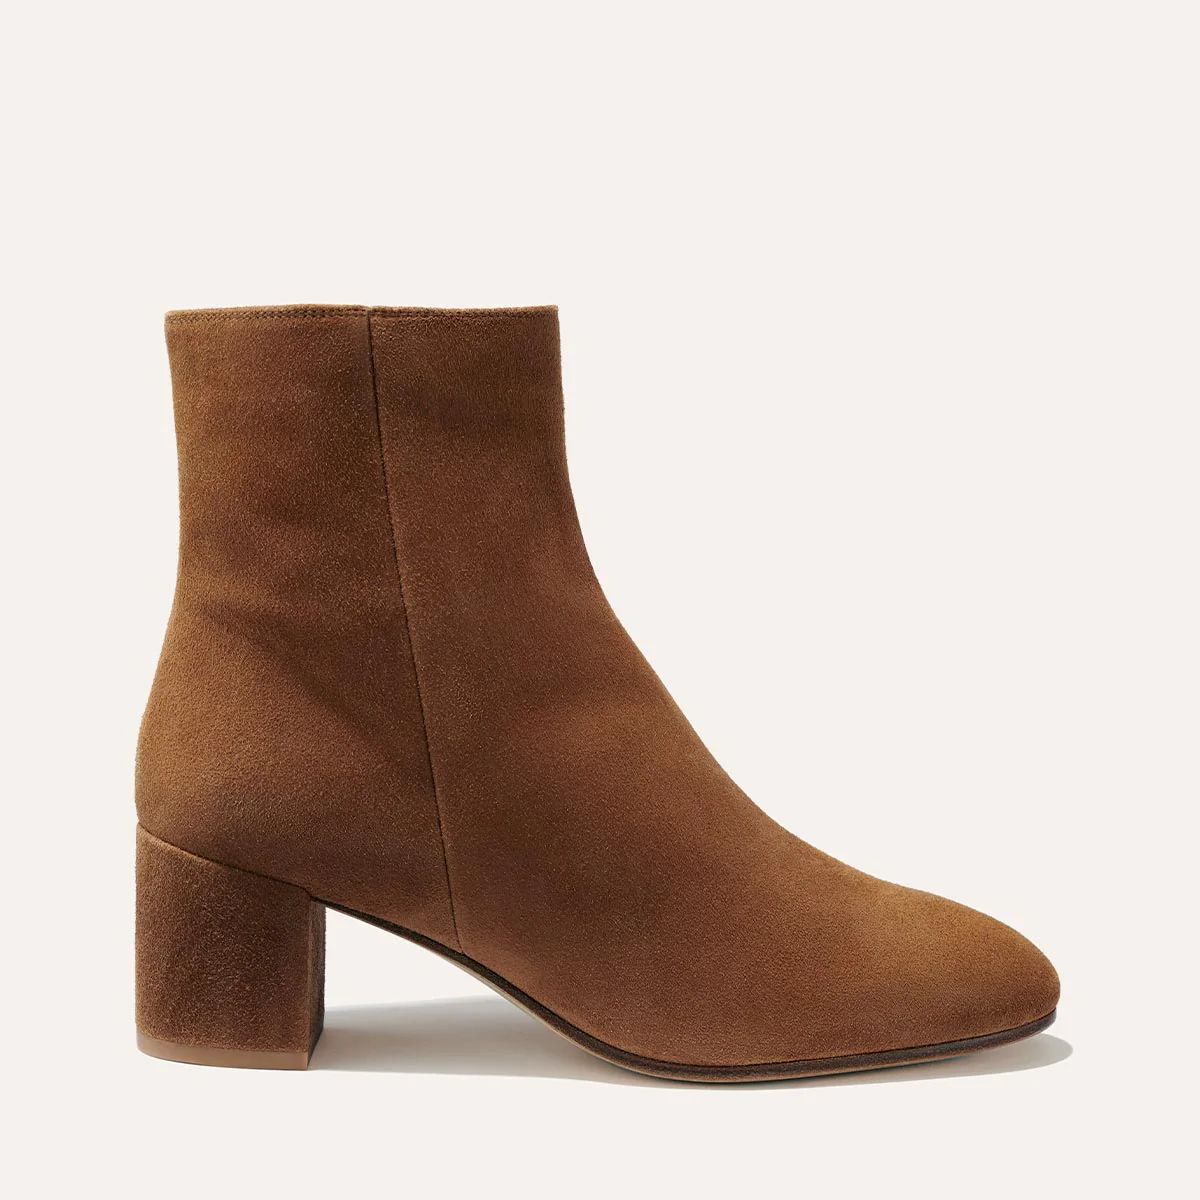 The Boot - Chestnut Suede | Margaux